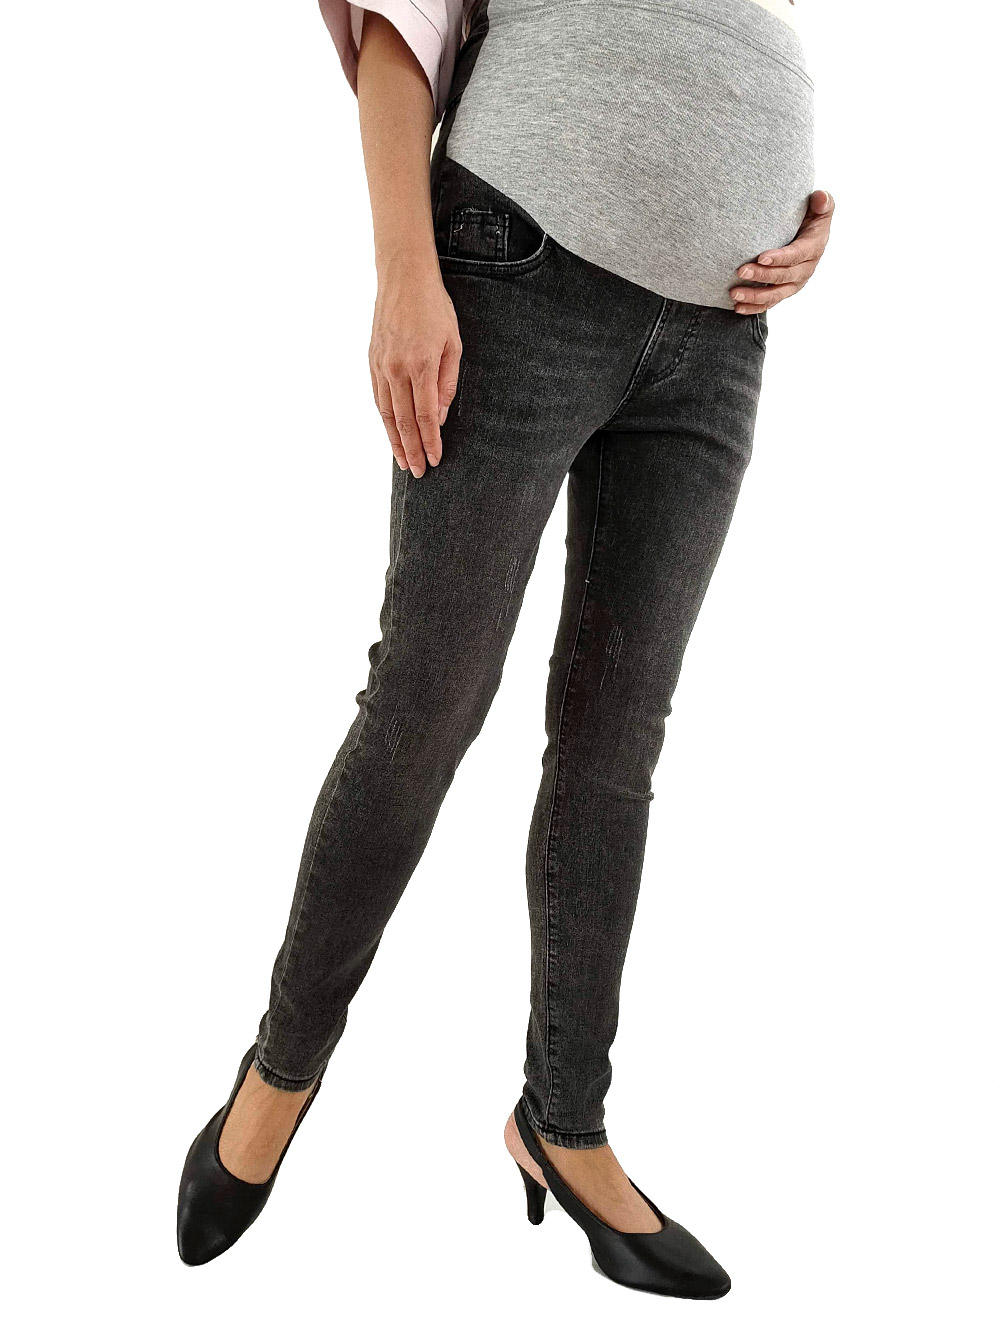 PA14155 Rustic Chic Jeans - Momstobeshop.com